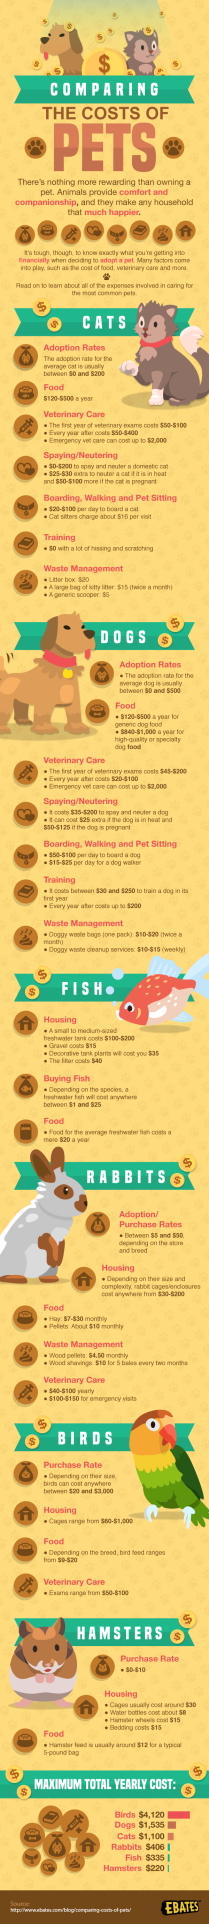 How Do Pet Costs Compare?